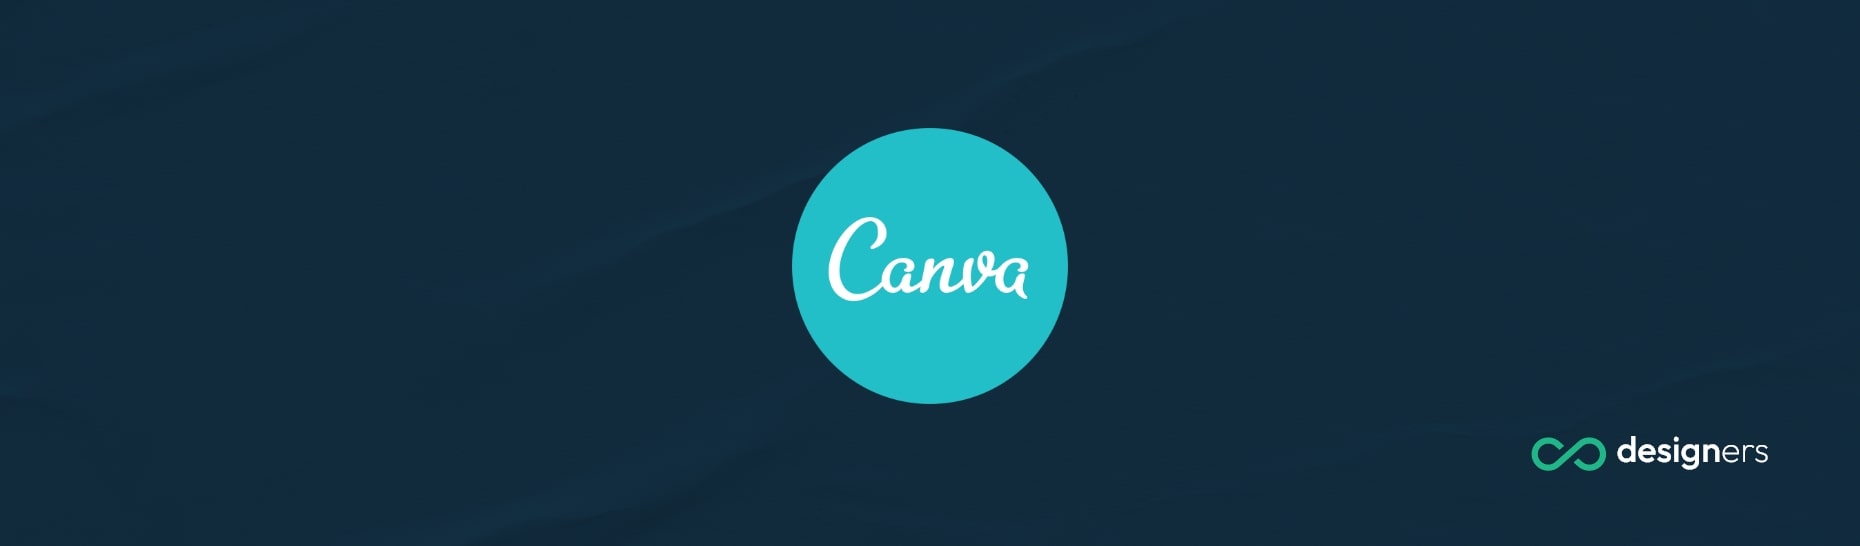 Is Canva in the US?